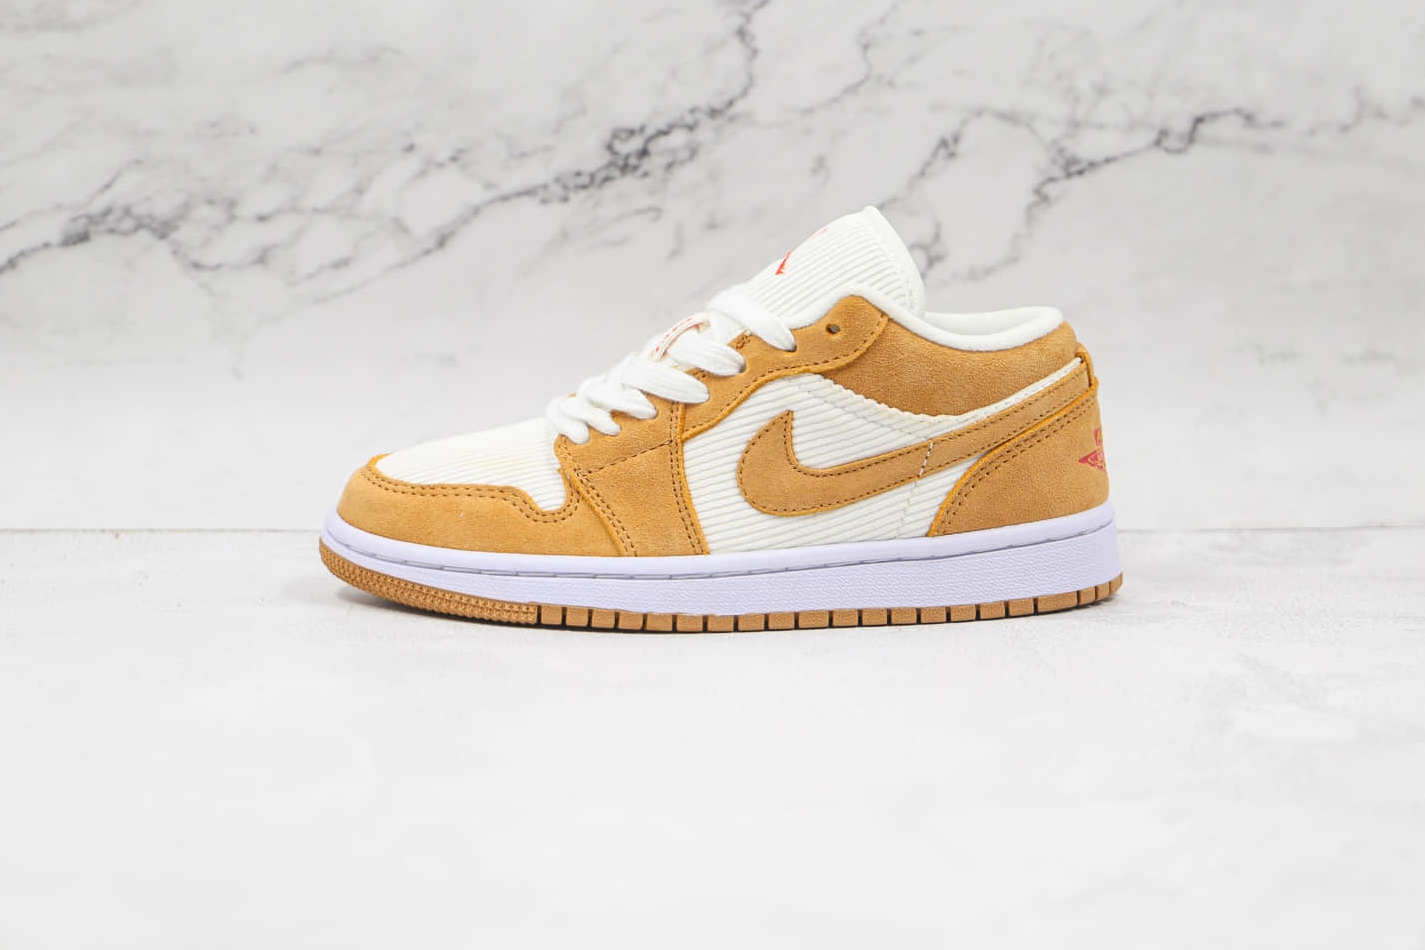 Air Jordan 1 Low SE 'Twine' DH7820-700 - Buy Stylish and Comfortable Sneakers Online